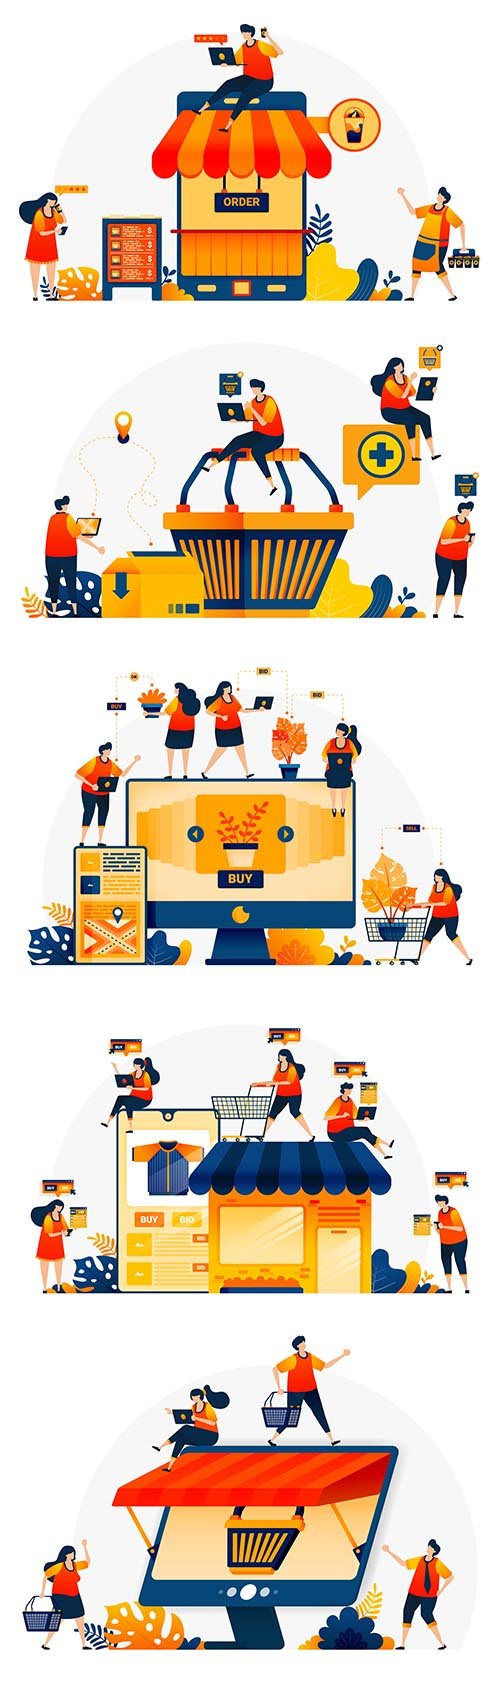 Illustration of shopping cart with people around to shop e-commerce